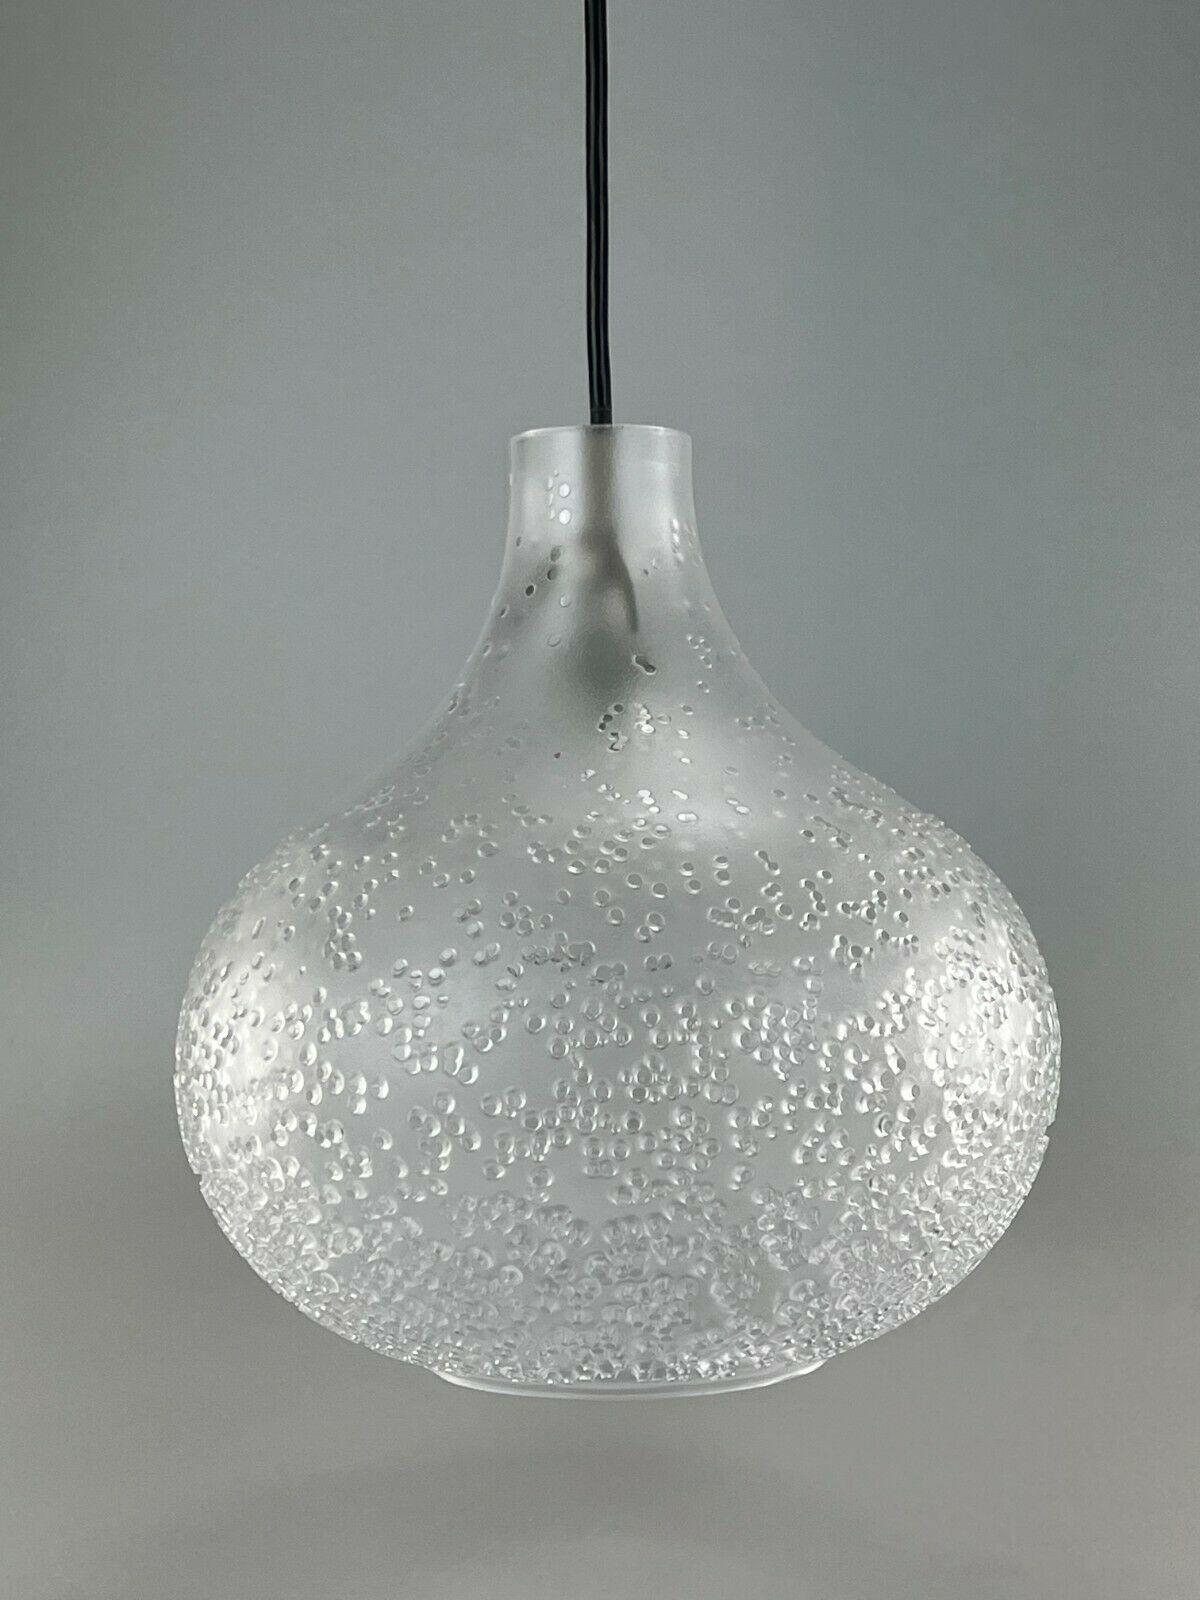 60s 70s Peill & Putzler hanging lamp ceiling lamp glass space design 60s 70s

Object: lamp

Manufacturer: Peill & Putzler

Condition: good

Age: around 1960-1970

Dimensions:

Diameter = 30cm
Height = 30cm

Other notes:

The